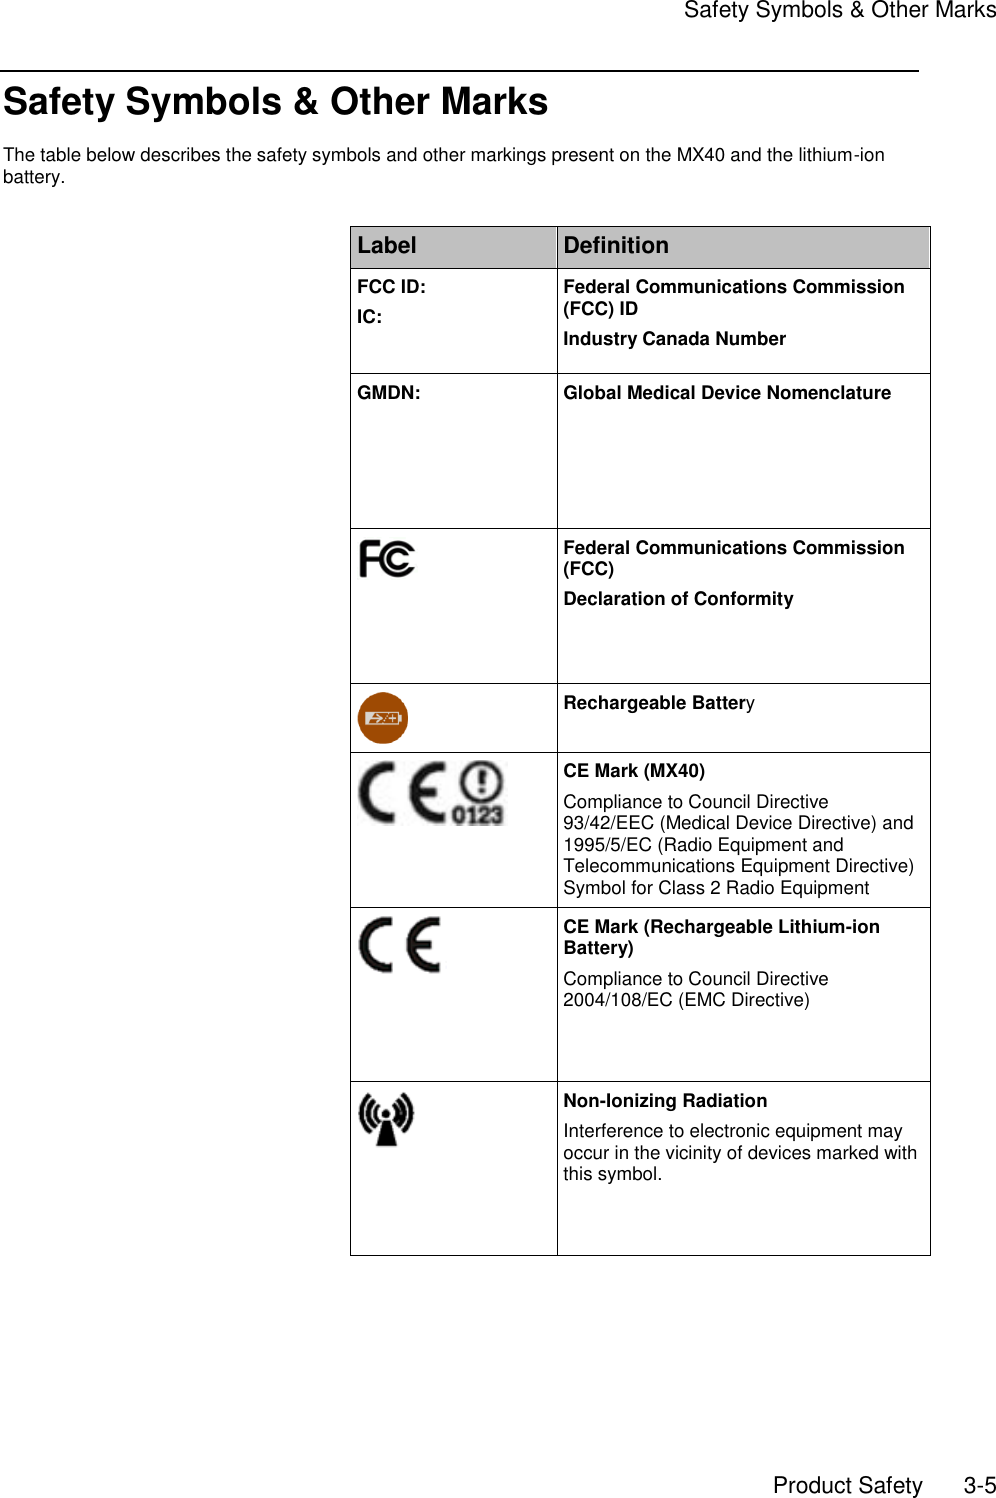     Safety Symbols &amp; Other Marks       Product Safety        3-5 Safety Symbols &amp; Other Marks The table below describes the safety symbols and other markings present on the MX40 and the lithium-ion battery.  Label Definition FCC ID: IC: Federal Communications Commission (FCC) ID Industry Canada Number GMDN: Global Medical Device Nomenclature  Federal Communications Commission (FCC)   Declaration of Conformity  Rechargeable Battery  CE Mark (MX40) Compliance to Council Directive 93/42/EEC (Medical Device Directive) and 1995/5/EC (Radio Equipment and Telecommunications Equipment Directive) Symbol for Class 2 Radio Equipment    CE Mark (Rechargeable Lithium-ion Battery) Compliance to Council Directive 2004/108/EC (EMC Directive)   Non-Ionizing Radiation Interference to electronic equipment may occur in the vicinity of devices marked with this symbol. 